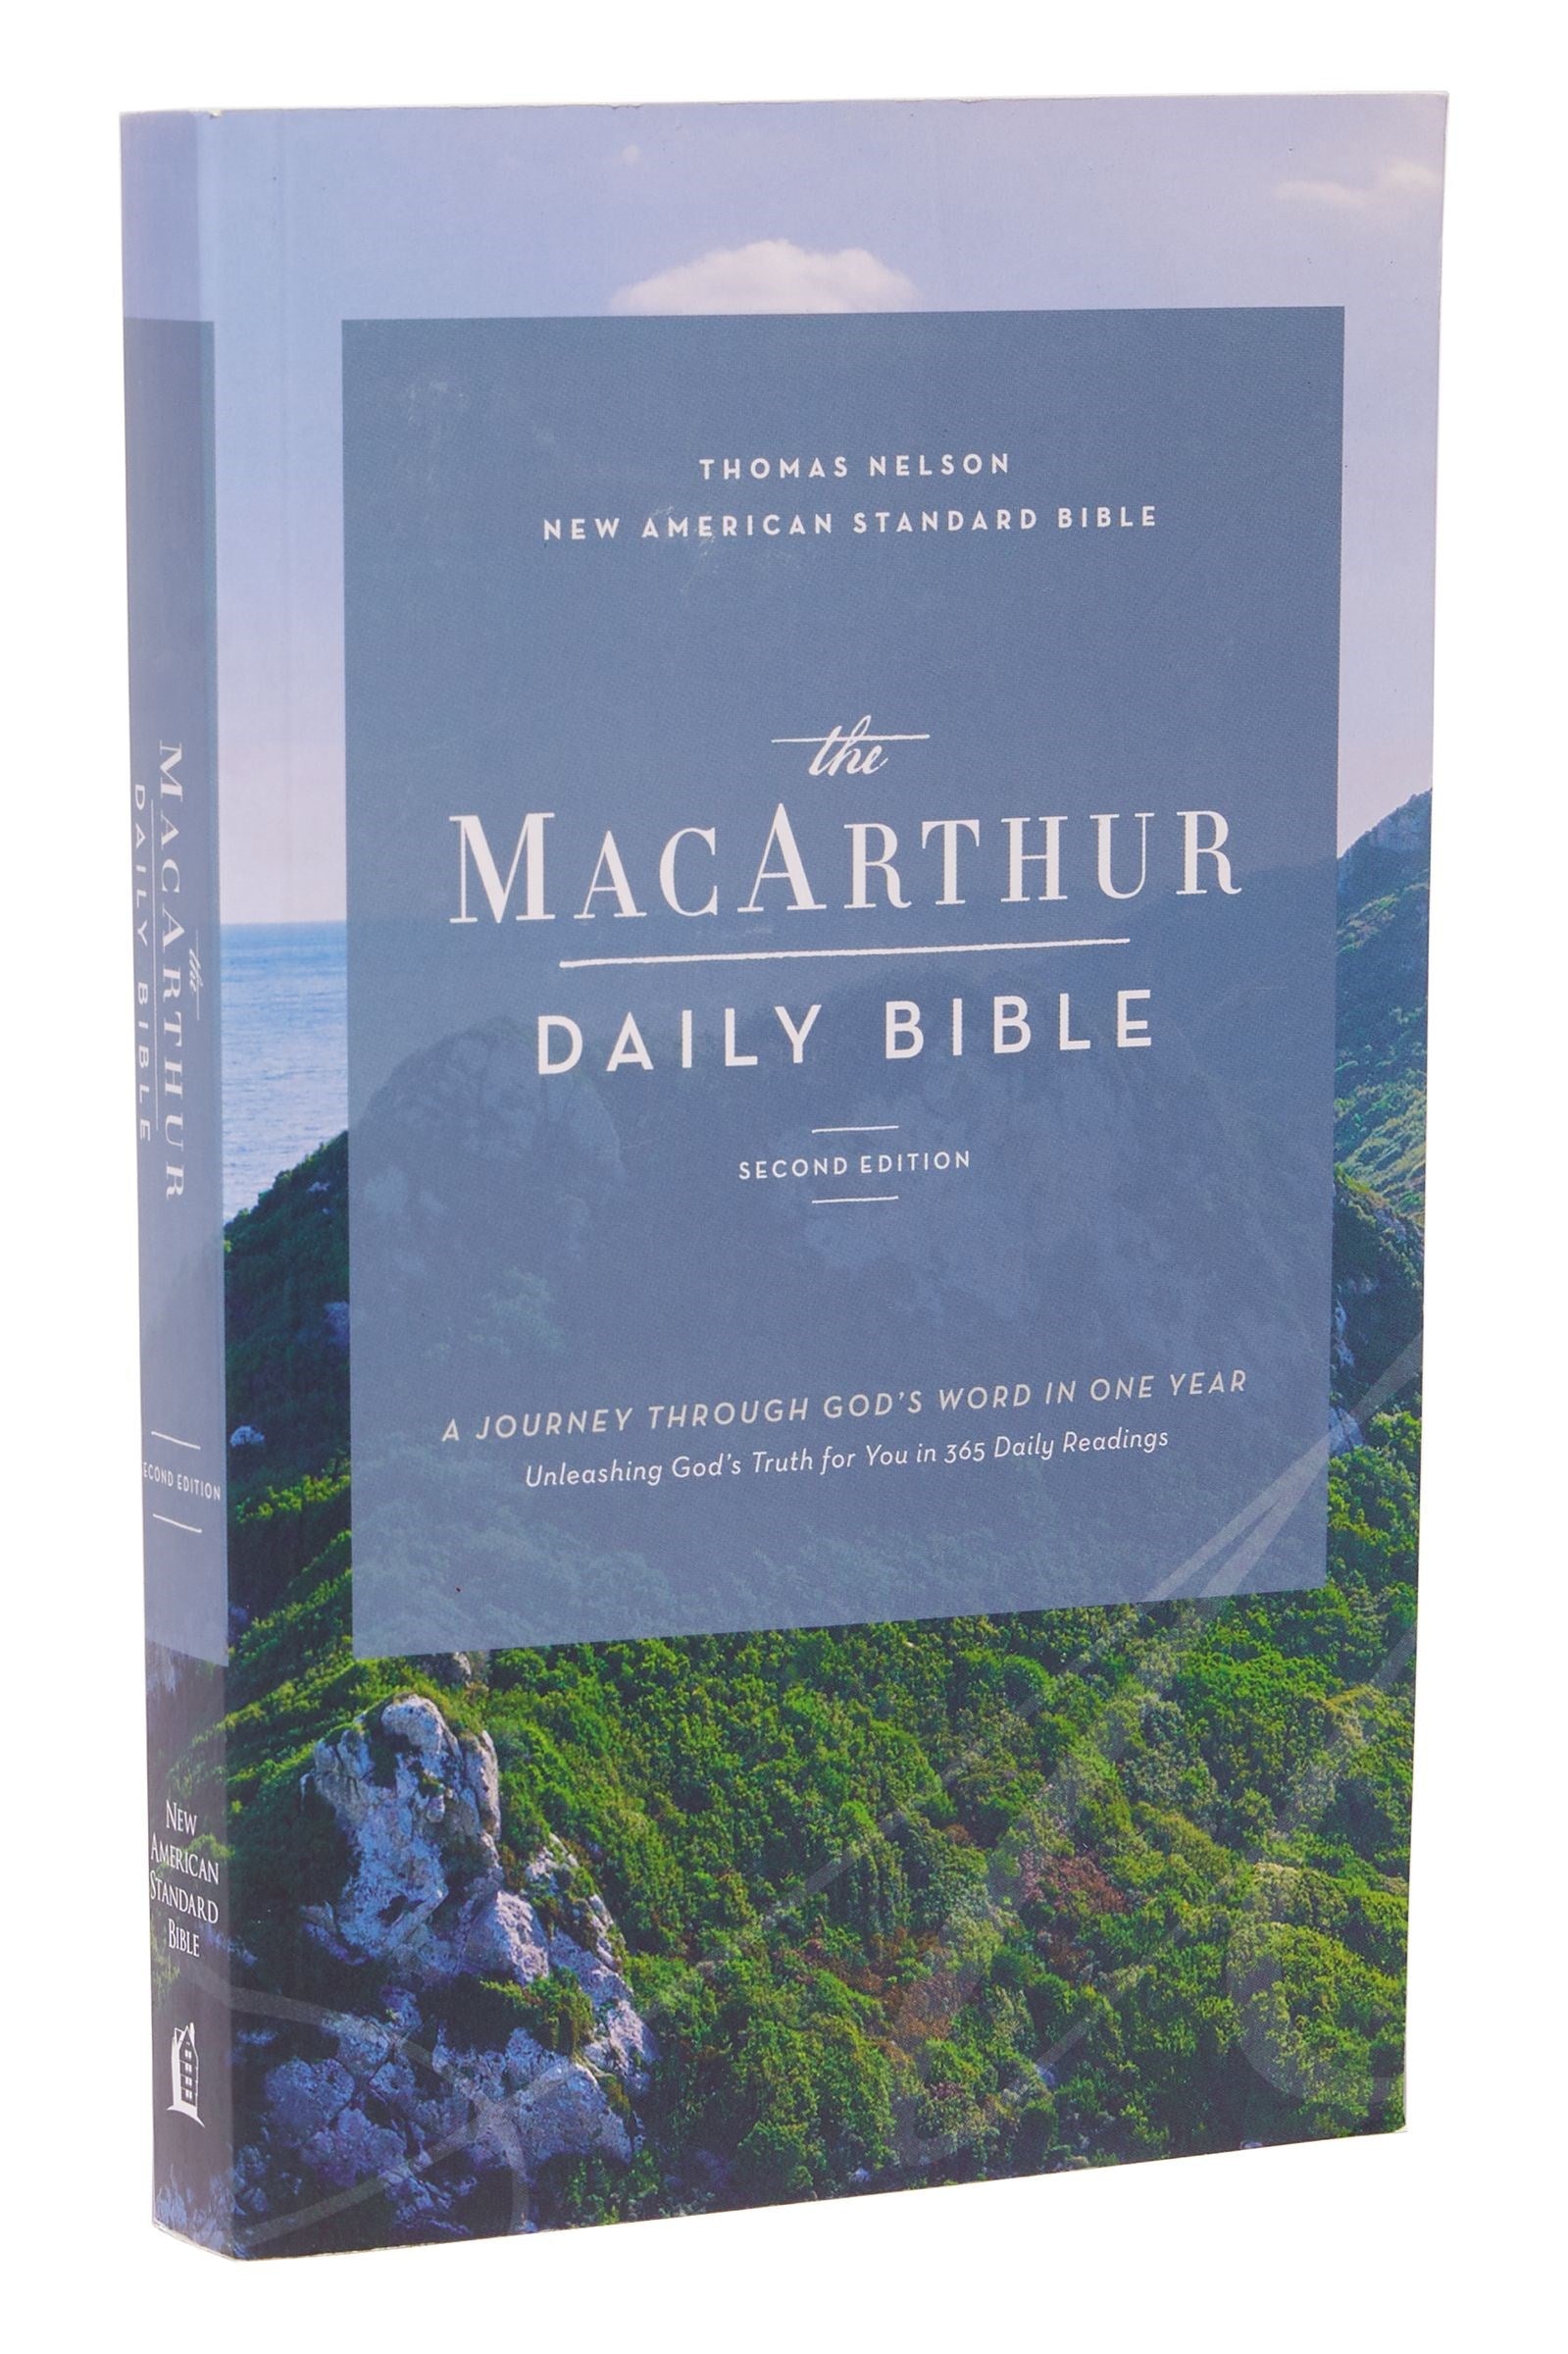 NASB, MacArthur Daily Bible, 2nd Edition, Paperback, Comfort Print  (2nd Edition)